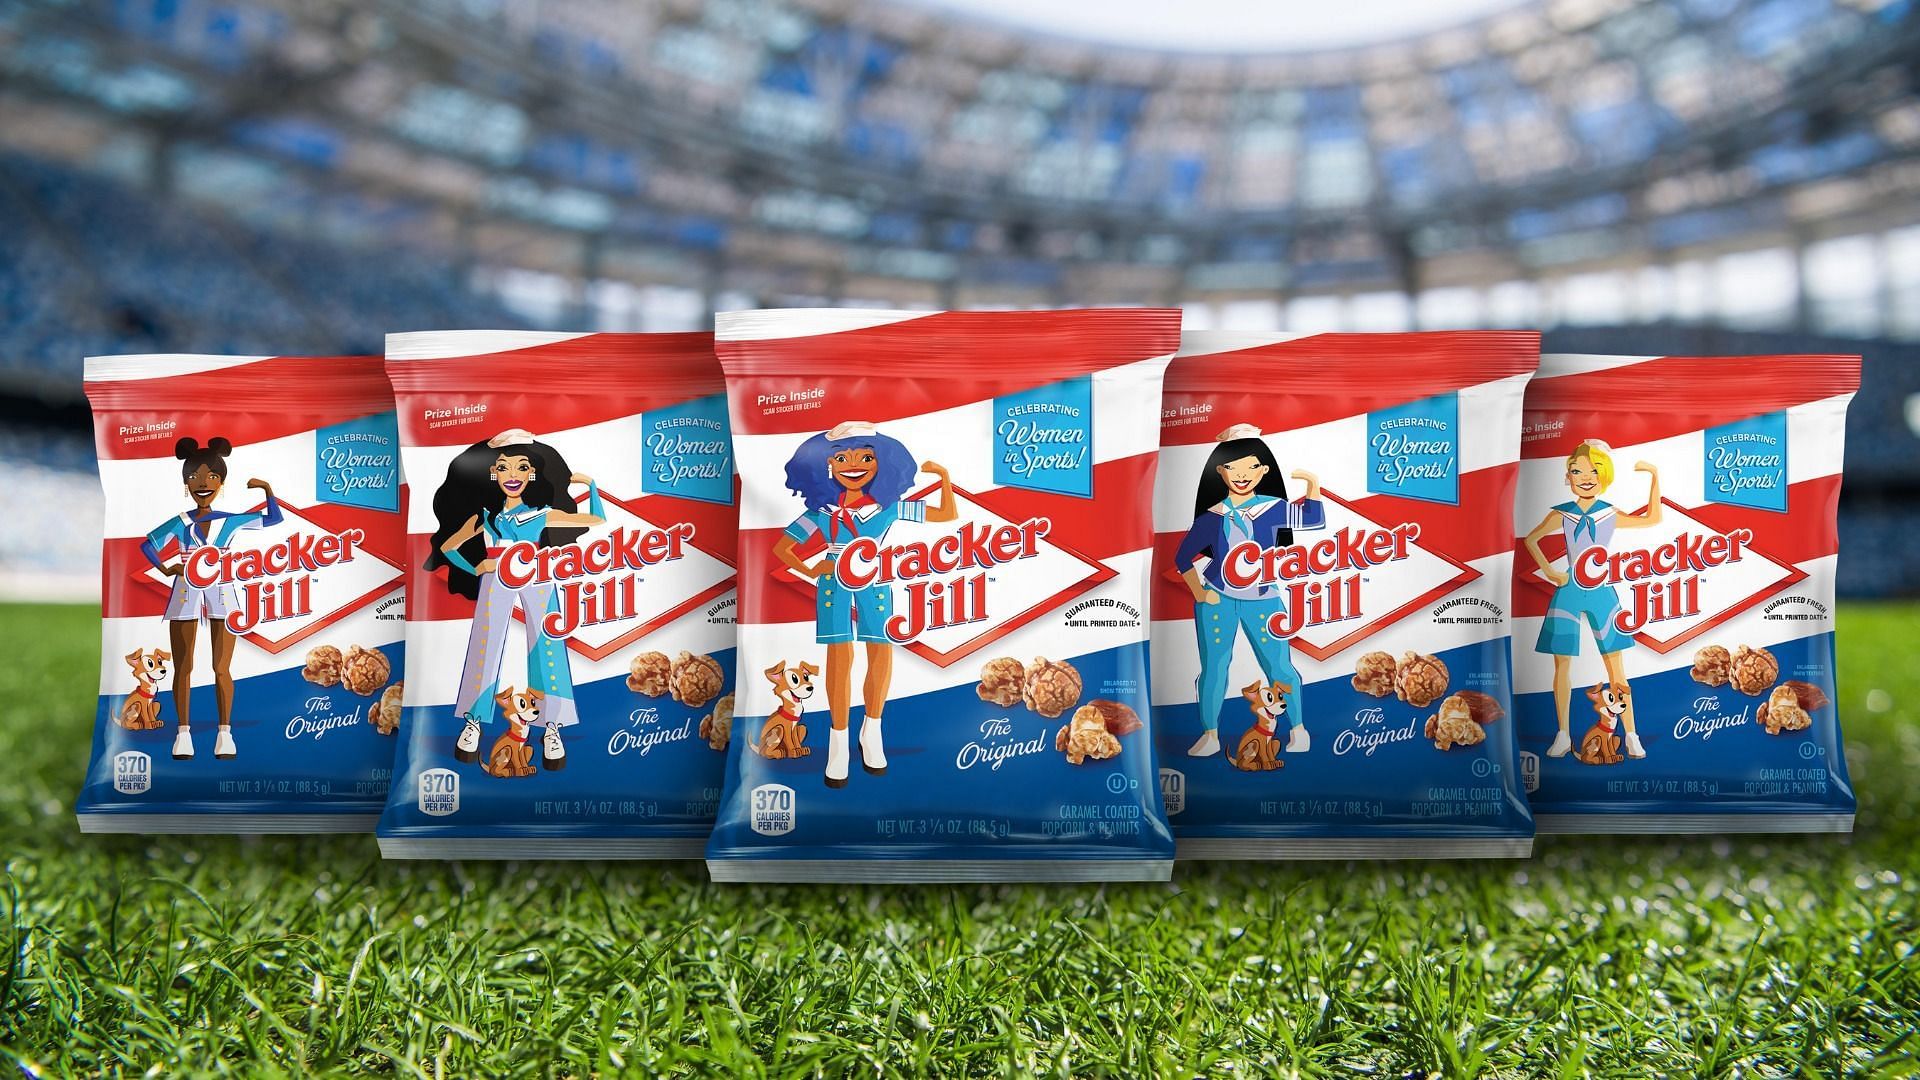 Cracker Jack launches Cracker Jill to celebrate women who break down barriers in sports (Image via Frito-Lay)